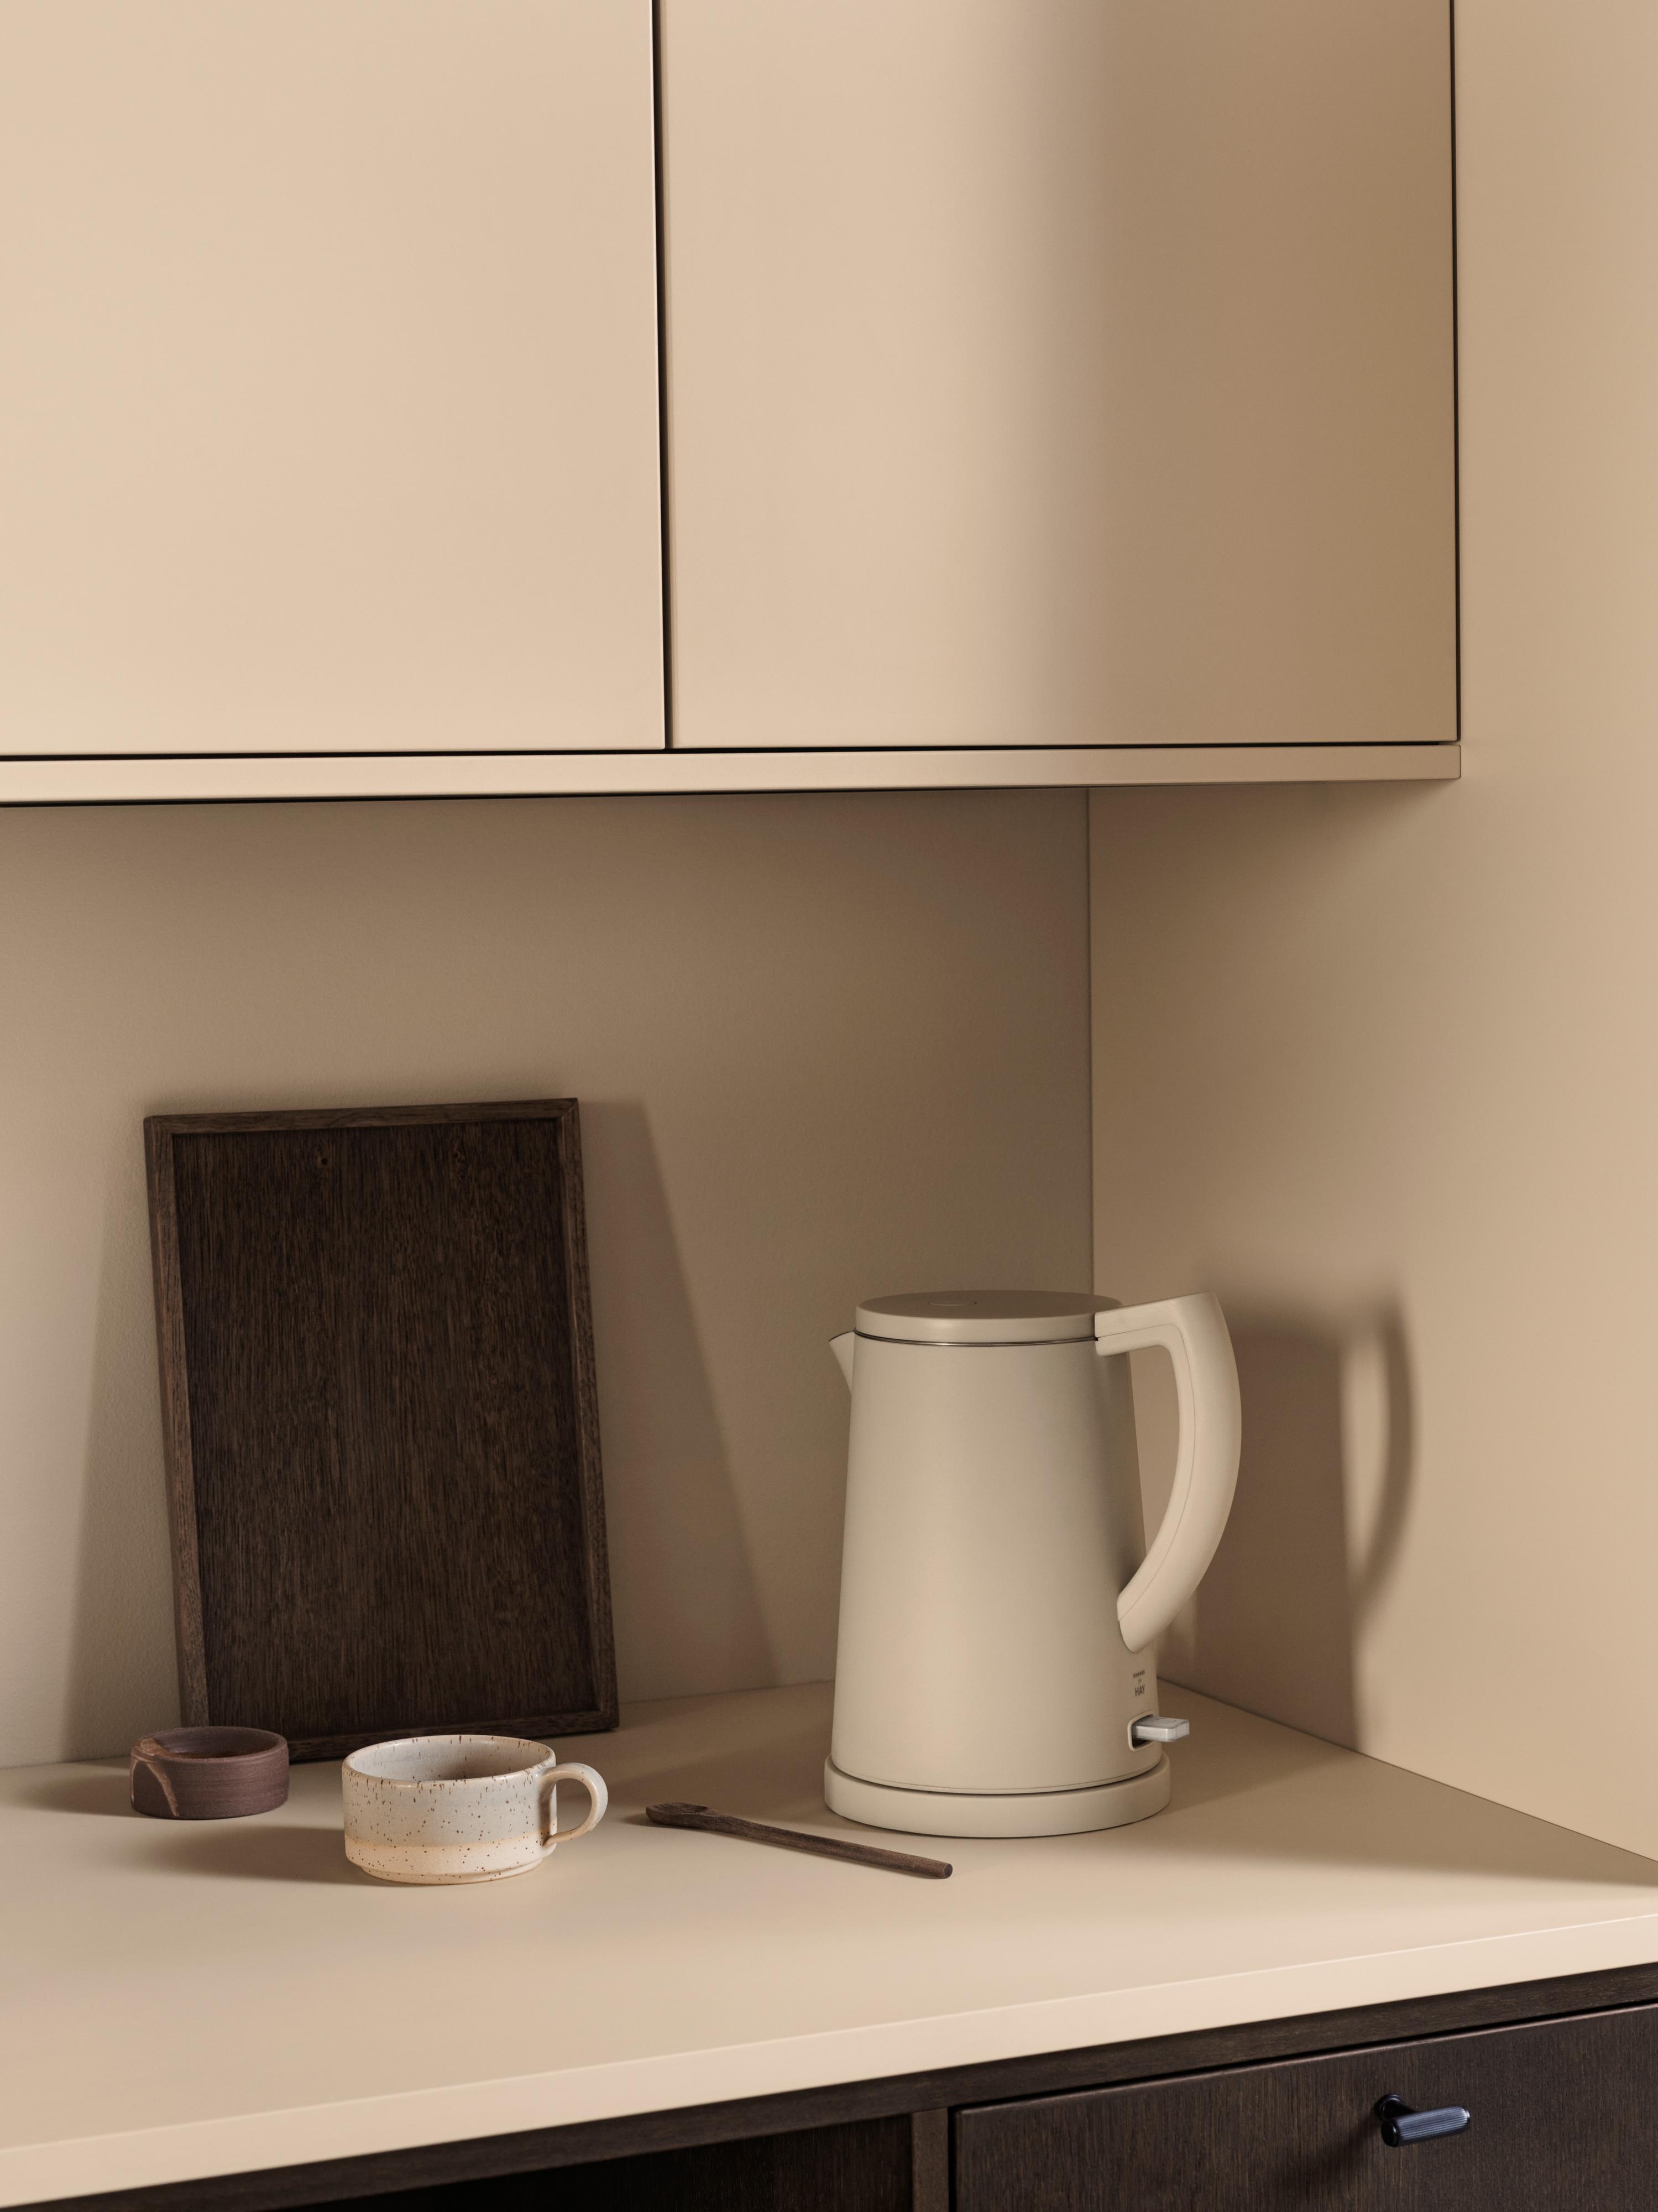 Beige kitchen and cooker